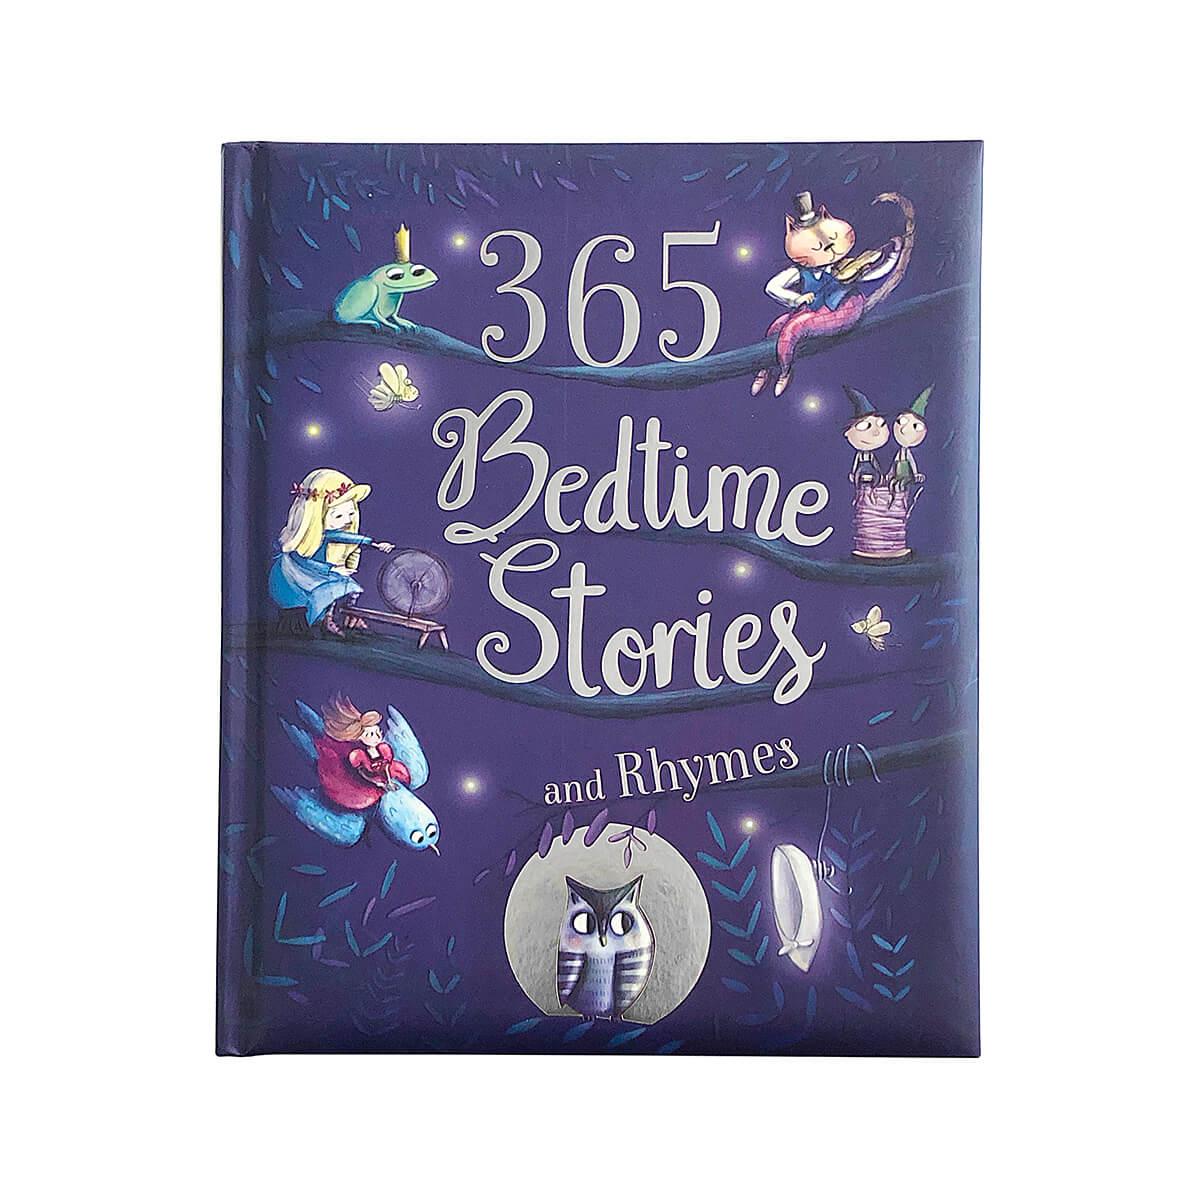  365 Bedtime Stories And Rhymes Book